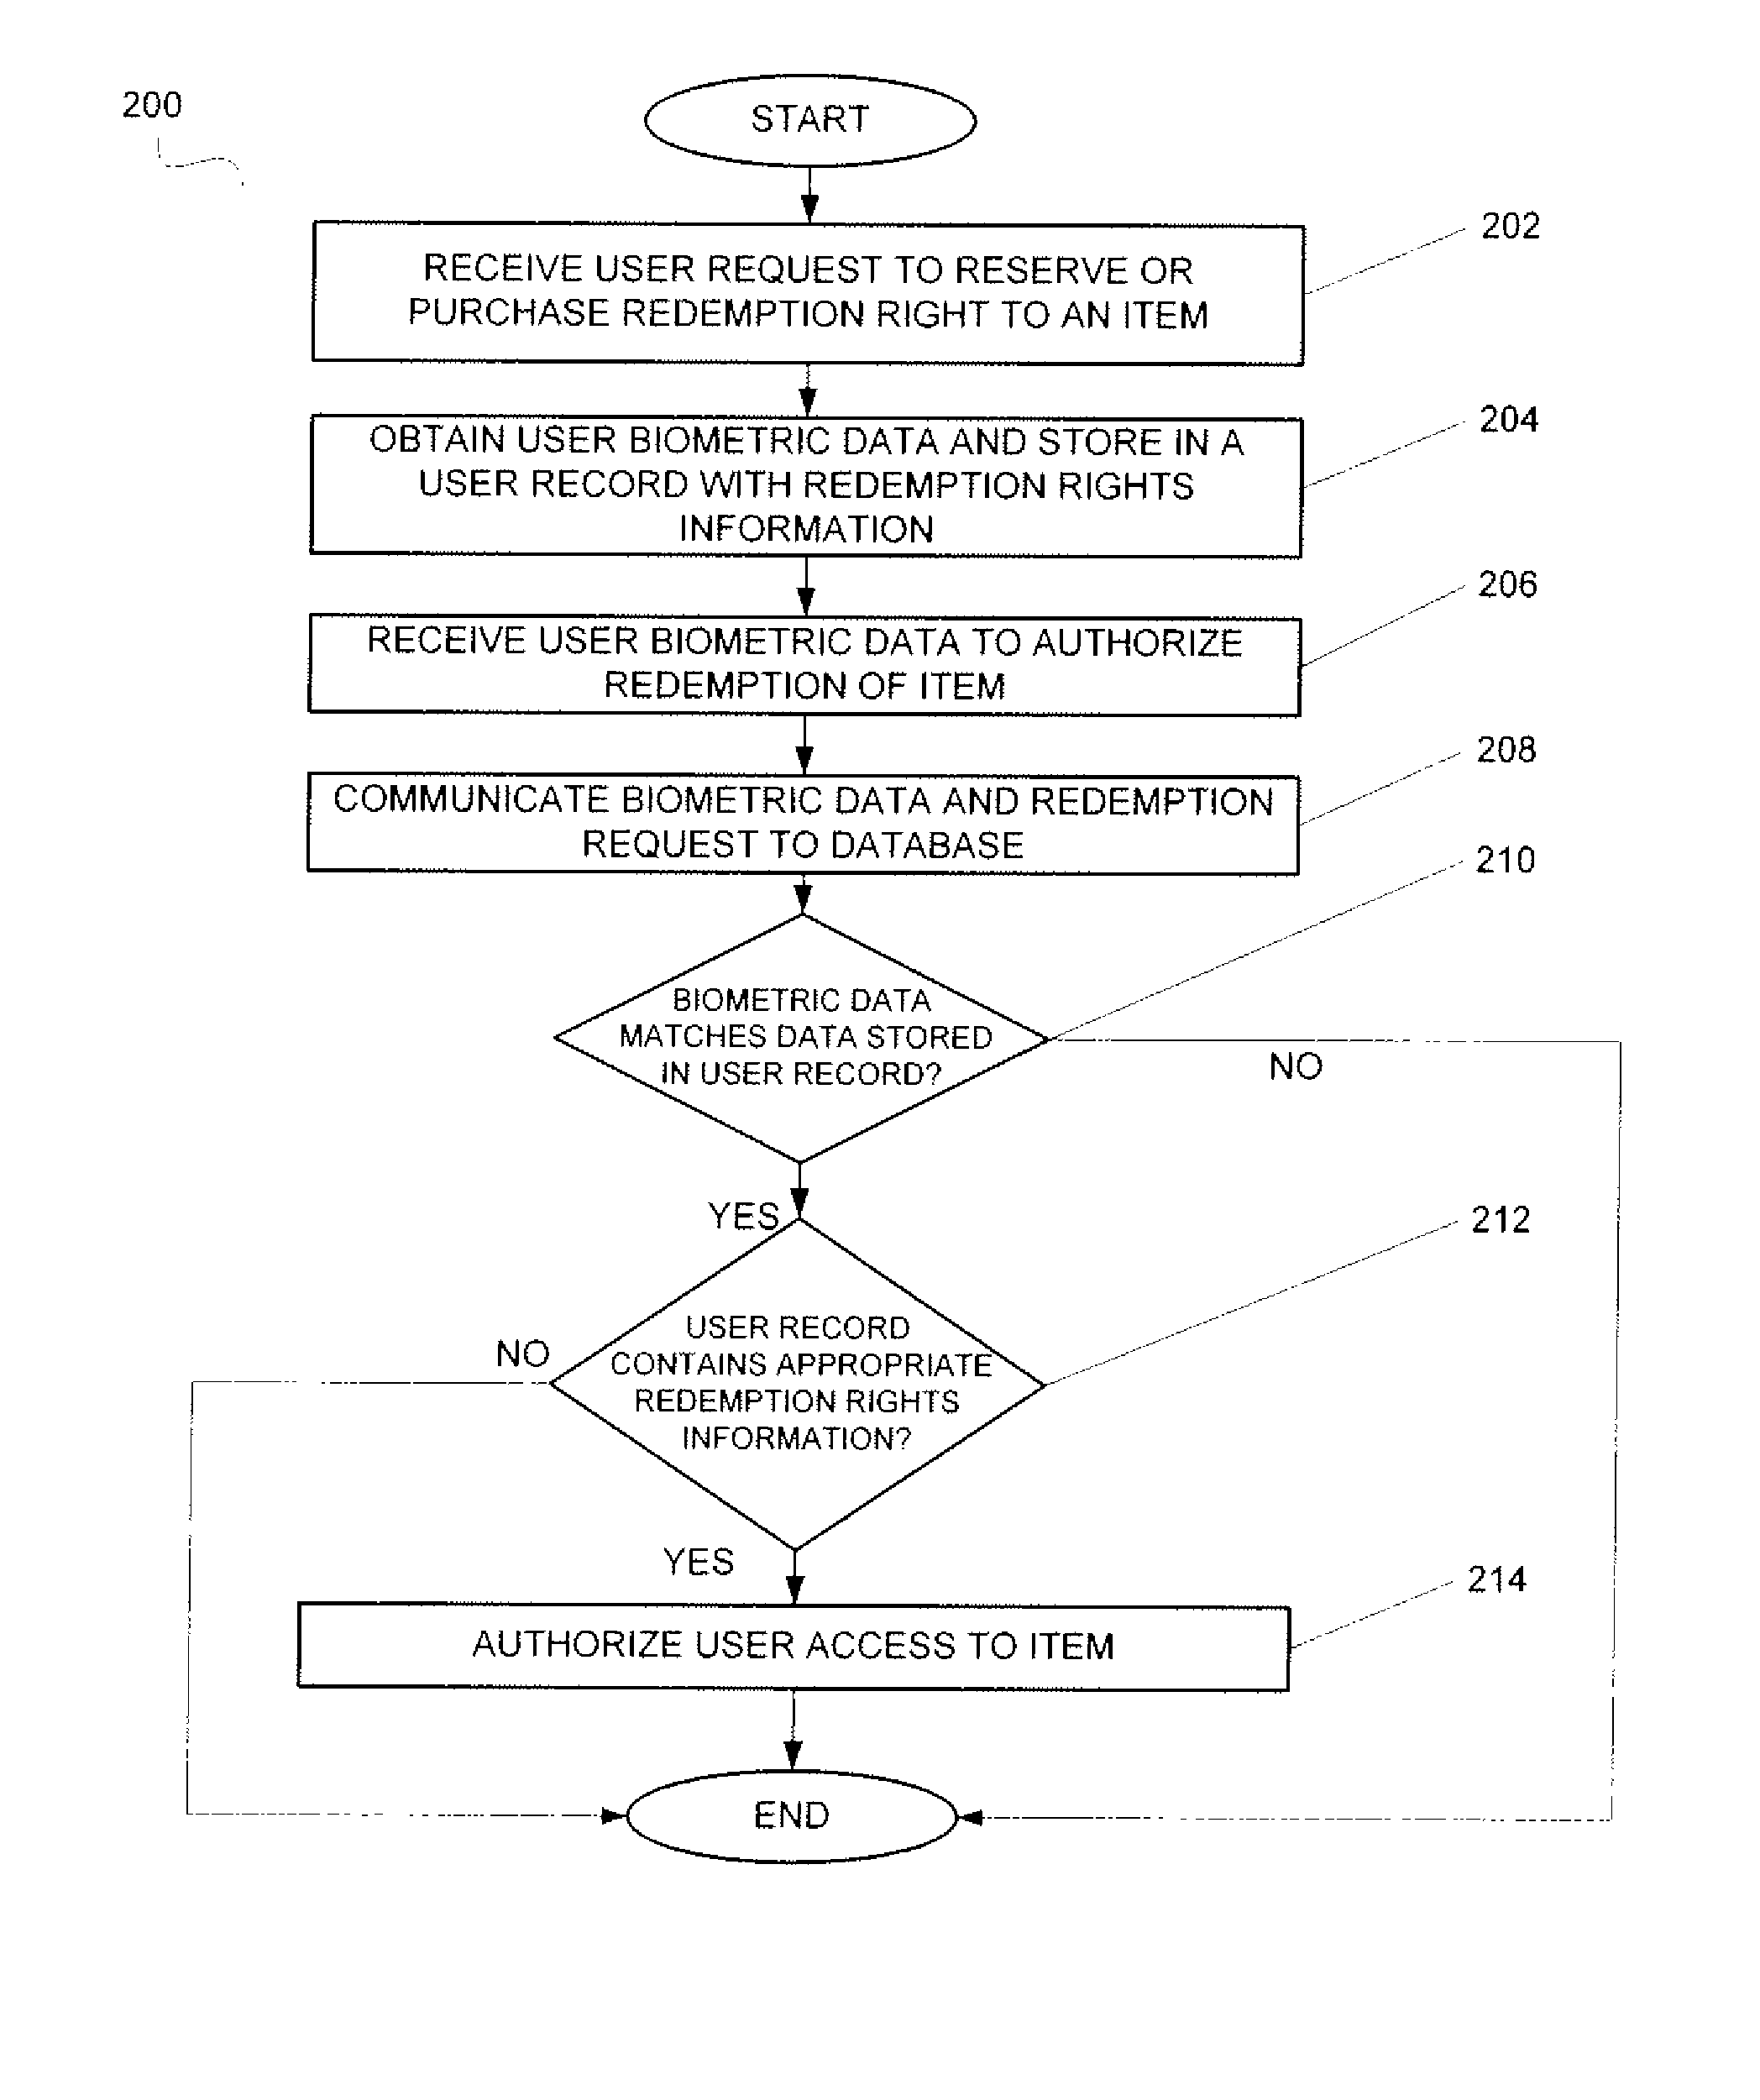 System and method for transferring biometrically accessed redemption rights